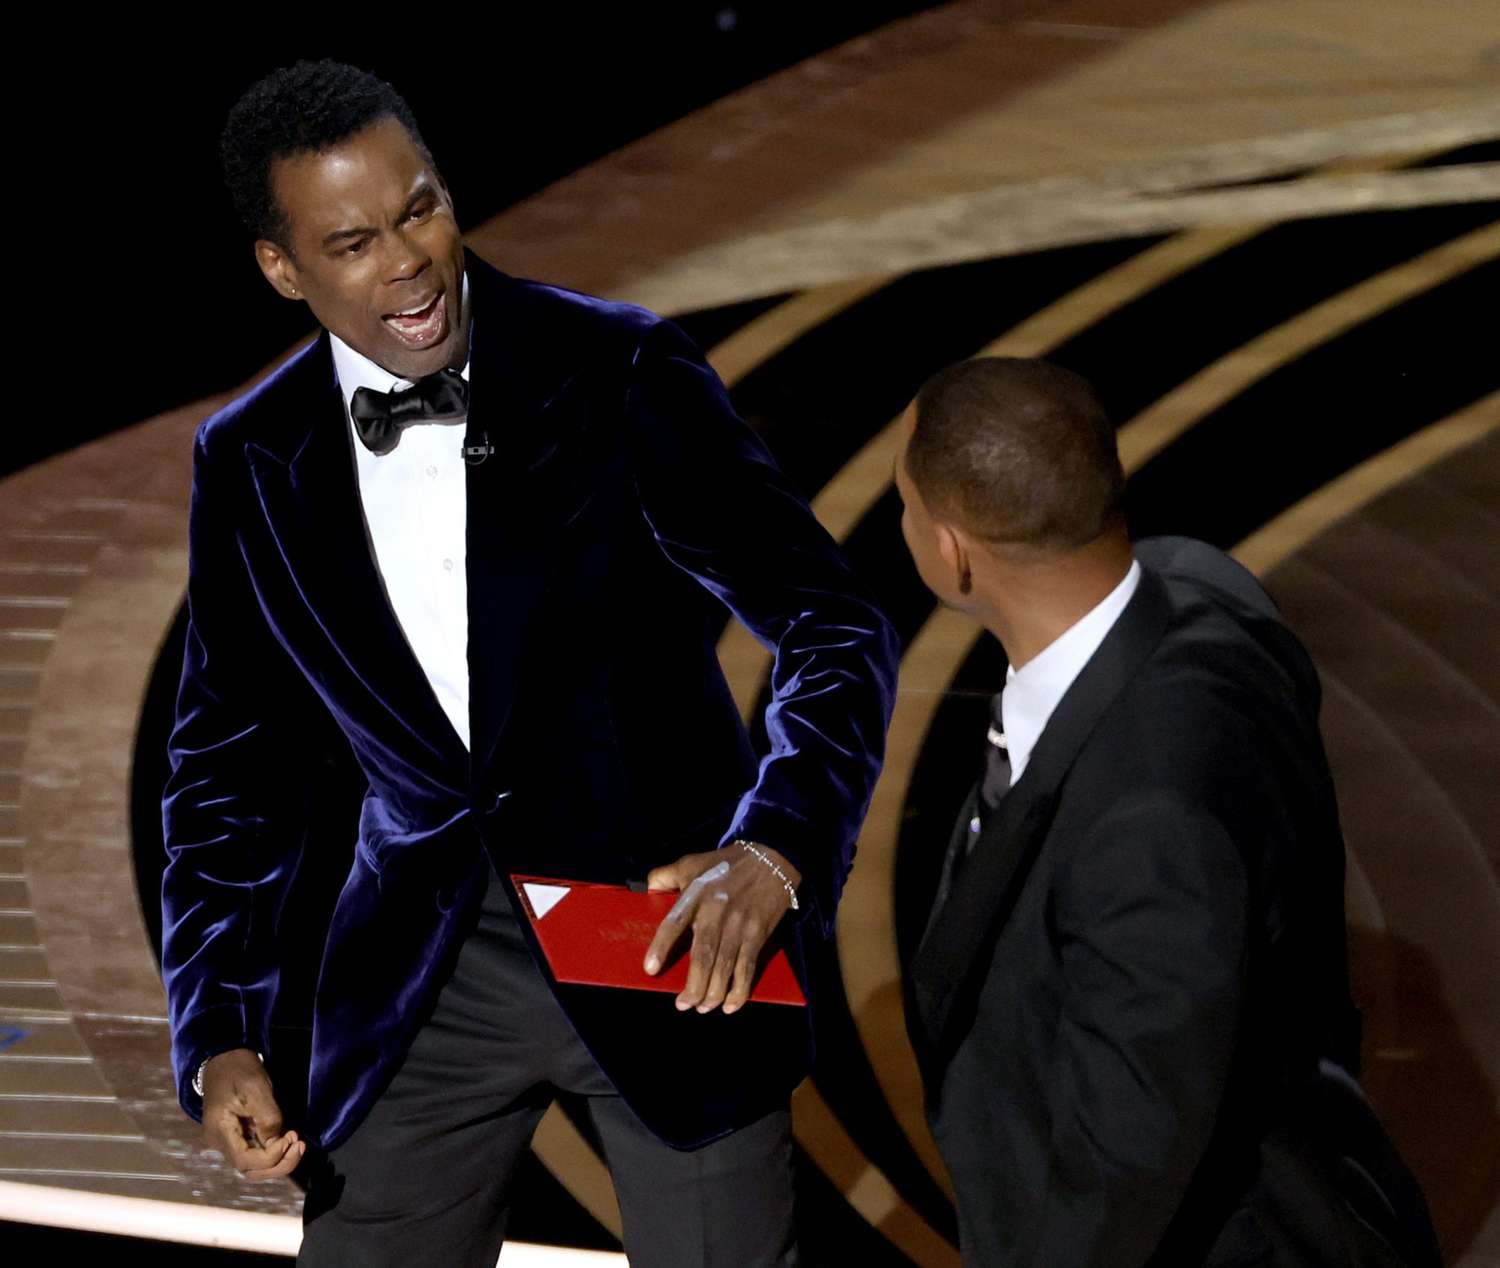 Chris Rock Will Smith 94th Annual Academy Awards - Show